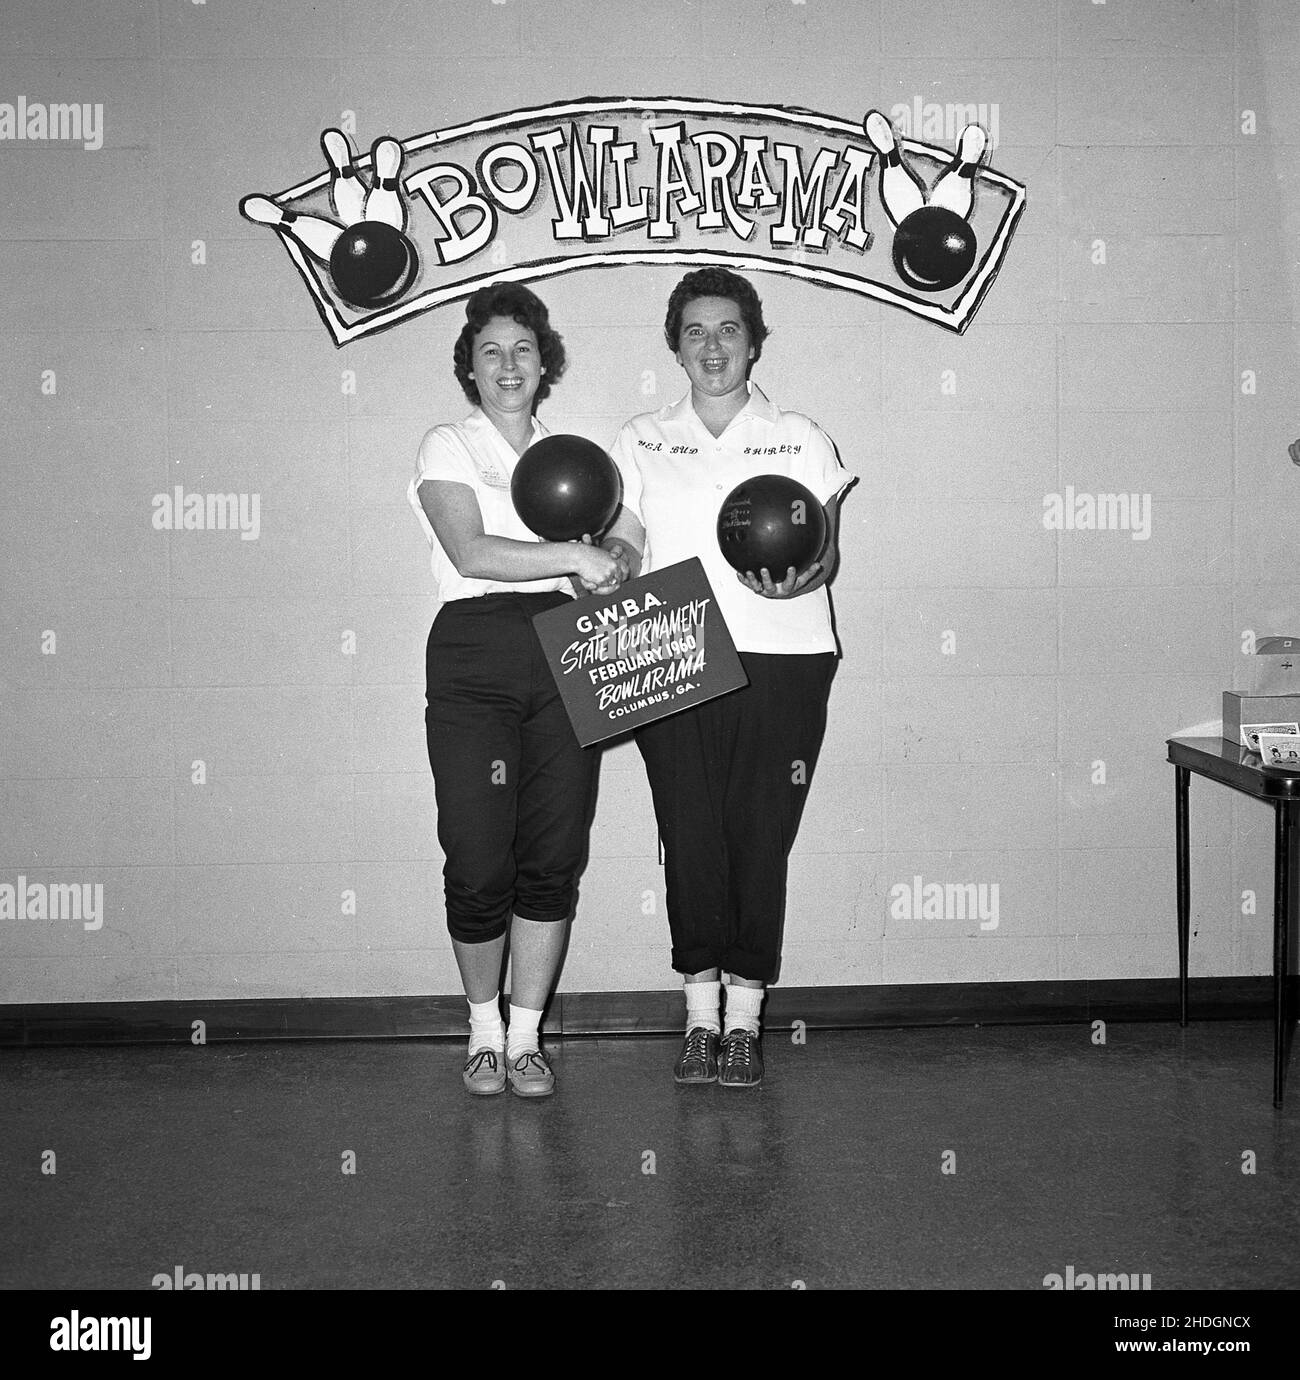 1960, historical, two adult female ten-pin bowlers in their team kit and holding their bowling balls, pose for a photo, Columbus, Ohio,USA. They are taking part in a 'Bowlarama' - sign on the wall behind them - a bowling competition between teams. In the 1950s and 60s, as well as a popular lesiure pastime in the USA, tenpin was also a competitive amateur sport, with an organised, competitive league structure, with both male and female teams. The Professional Bowlers Association of America (PBA) was founded in 1958. Stock Photo